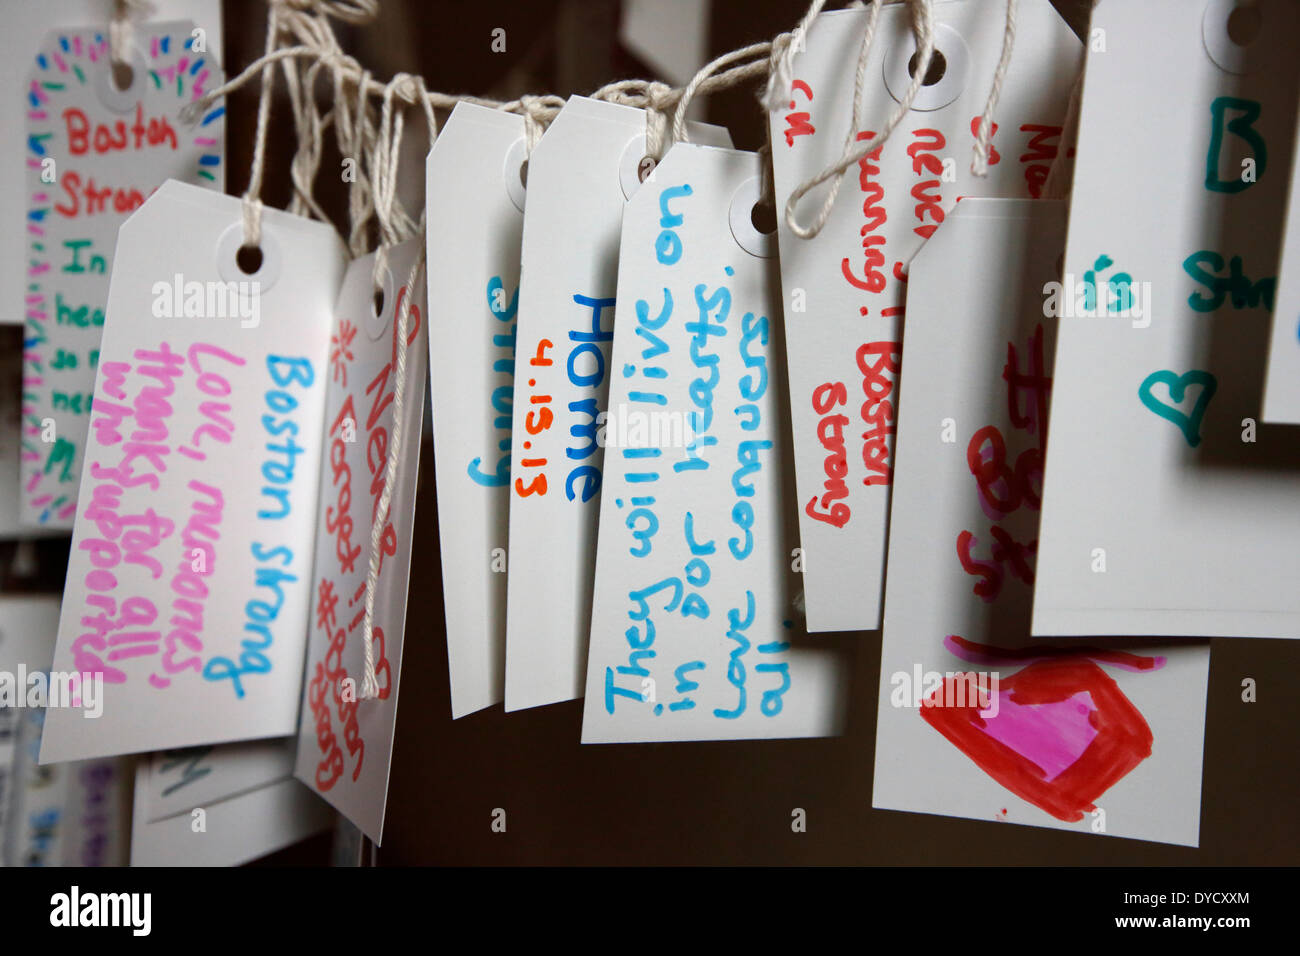 Boston, Massachusetts, USA, 14th April 2014. Tags with personal messages from visitors to the Boston Marathon Memorial exhibit hang from a tree in the Boston Public Library. Tuesday marks the one-year anniversary of the Boston Marathon bombings. Stock Photo